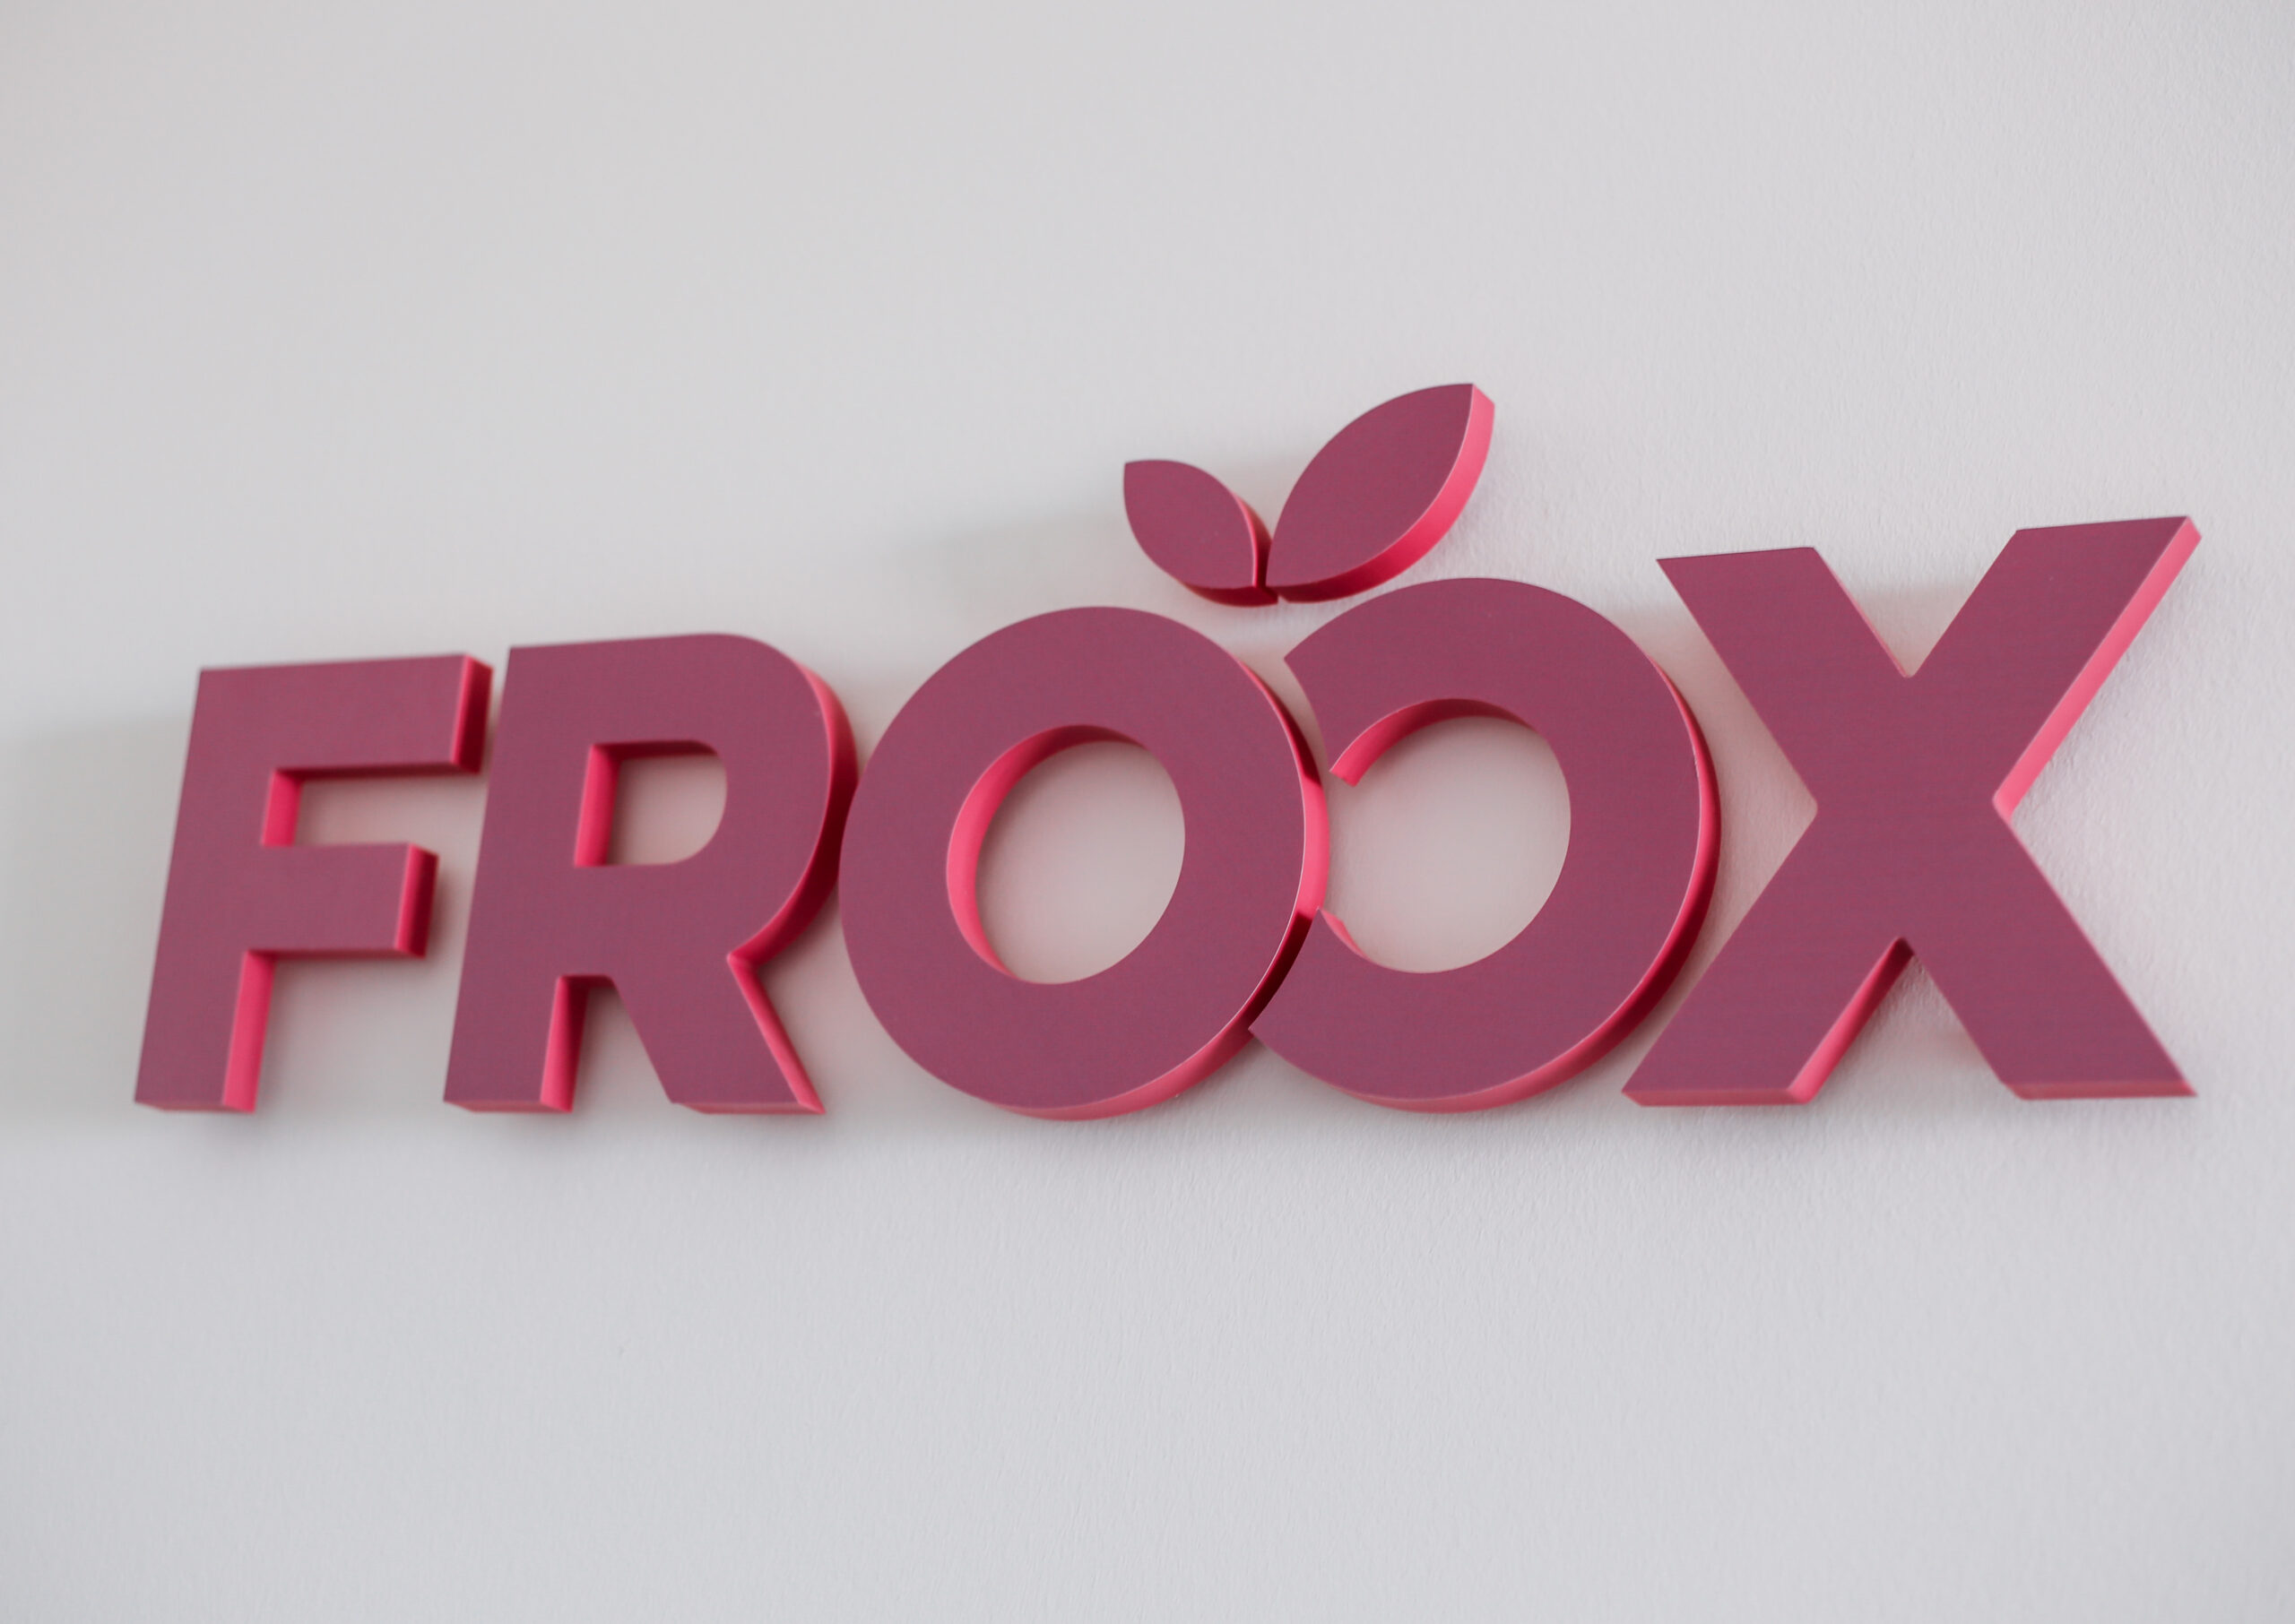 Froox GmbH